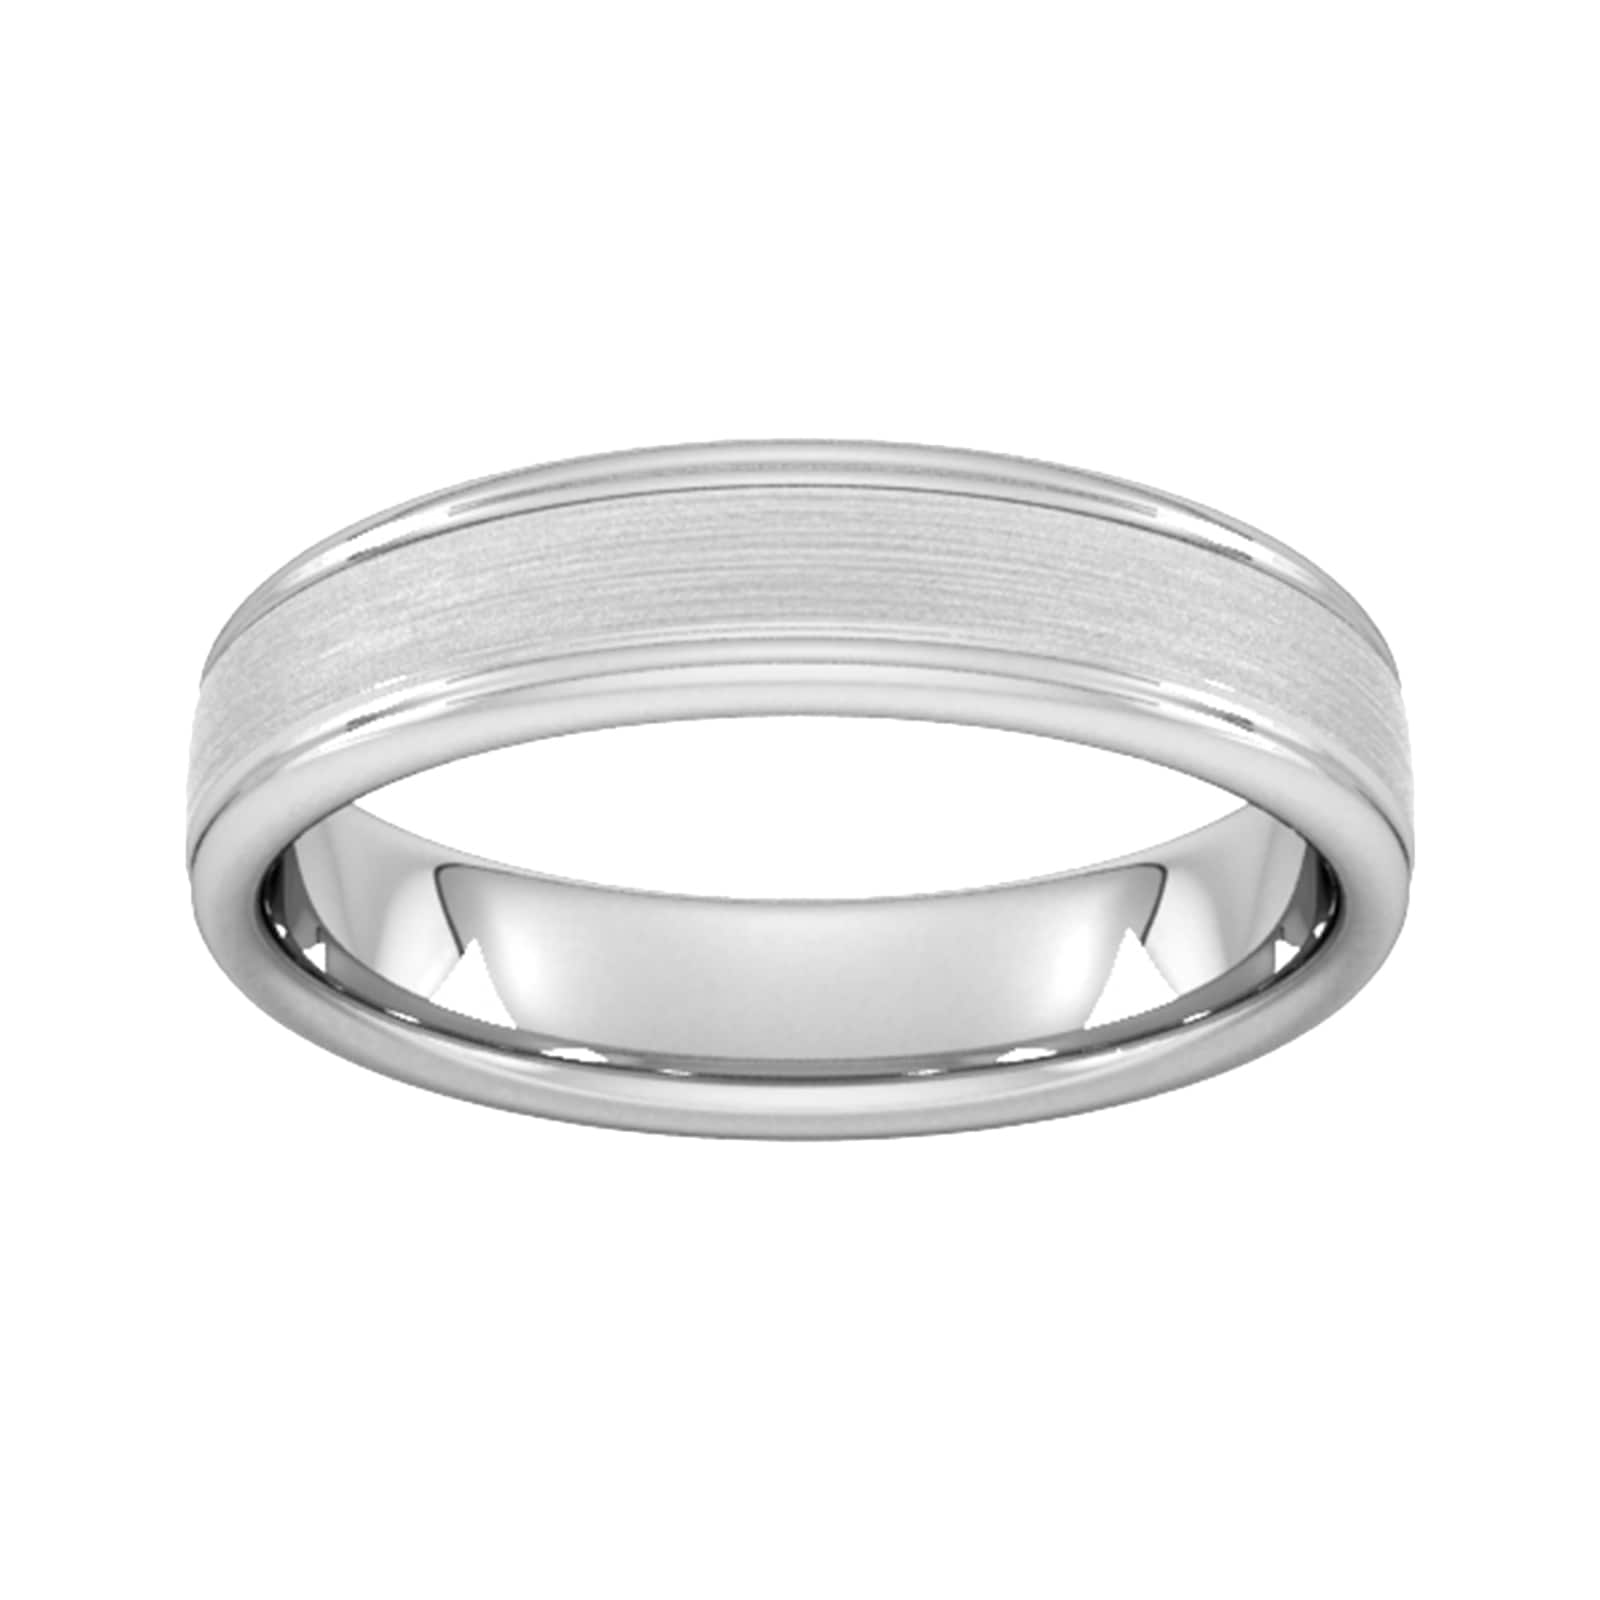 5mm Traditional Court Standard Matt Centre With Grooves Wedding Ring In 18 Carat White Gold - Ring Size X